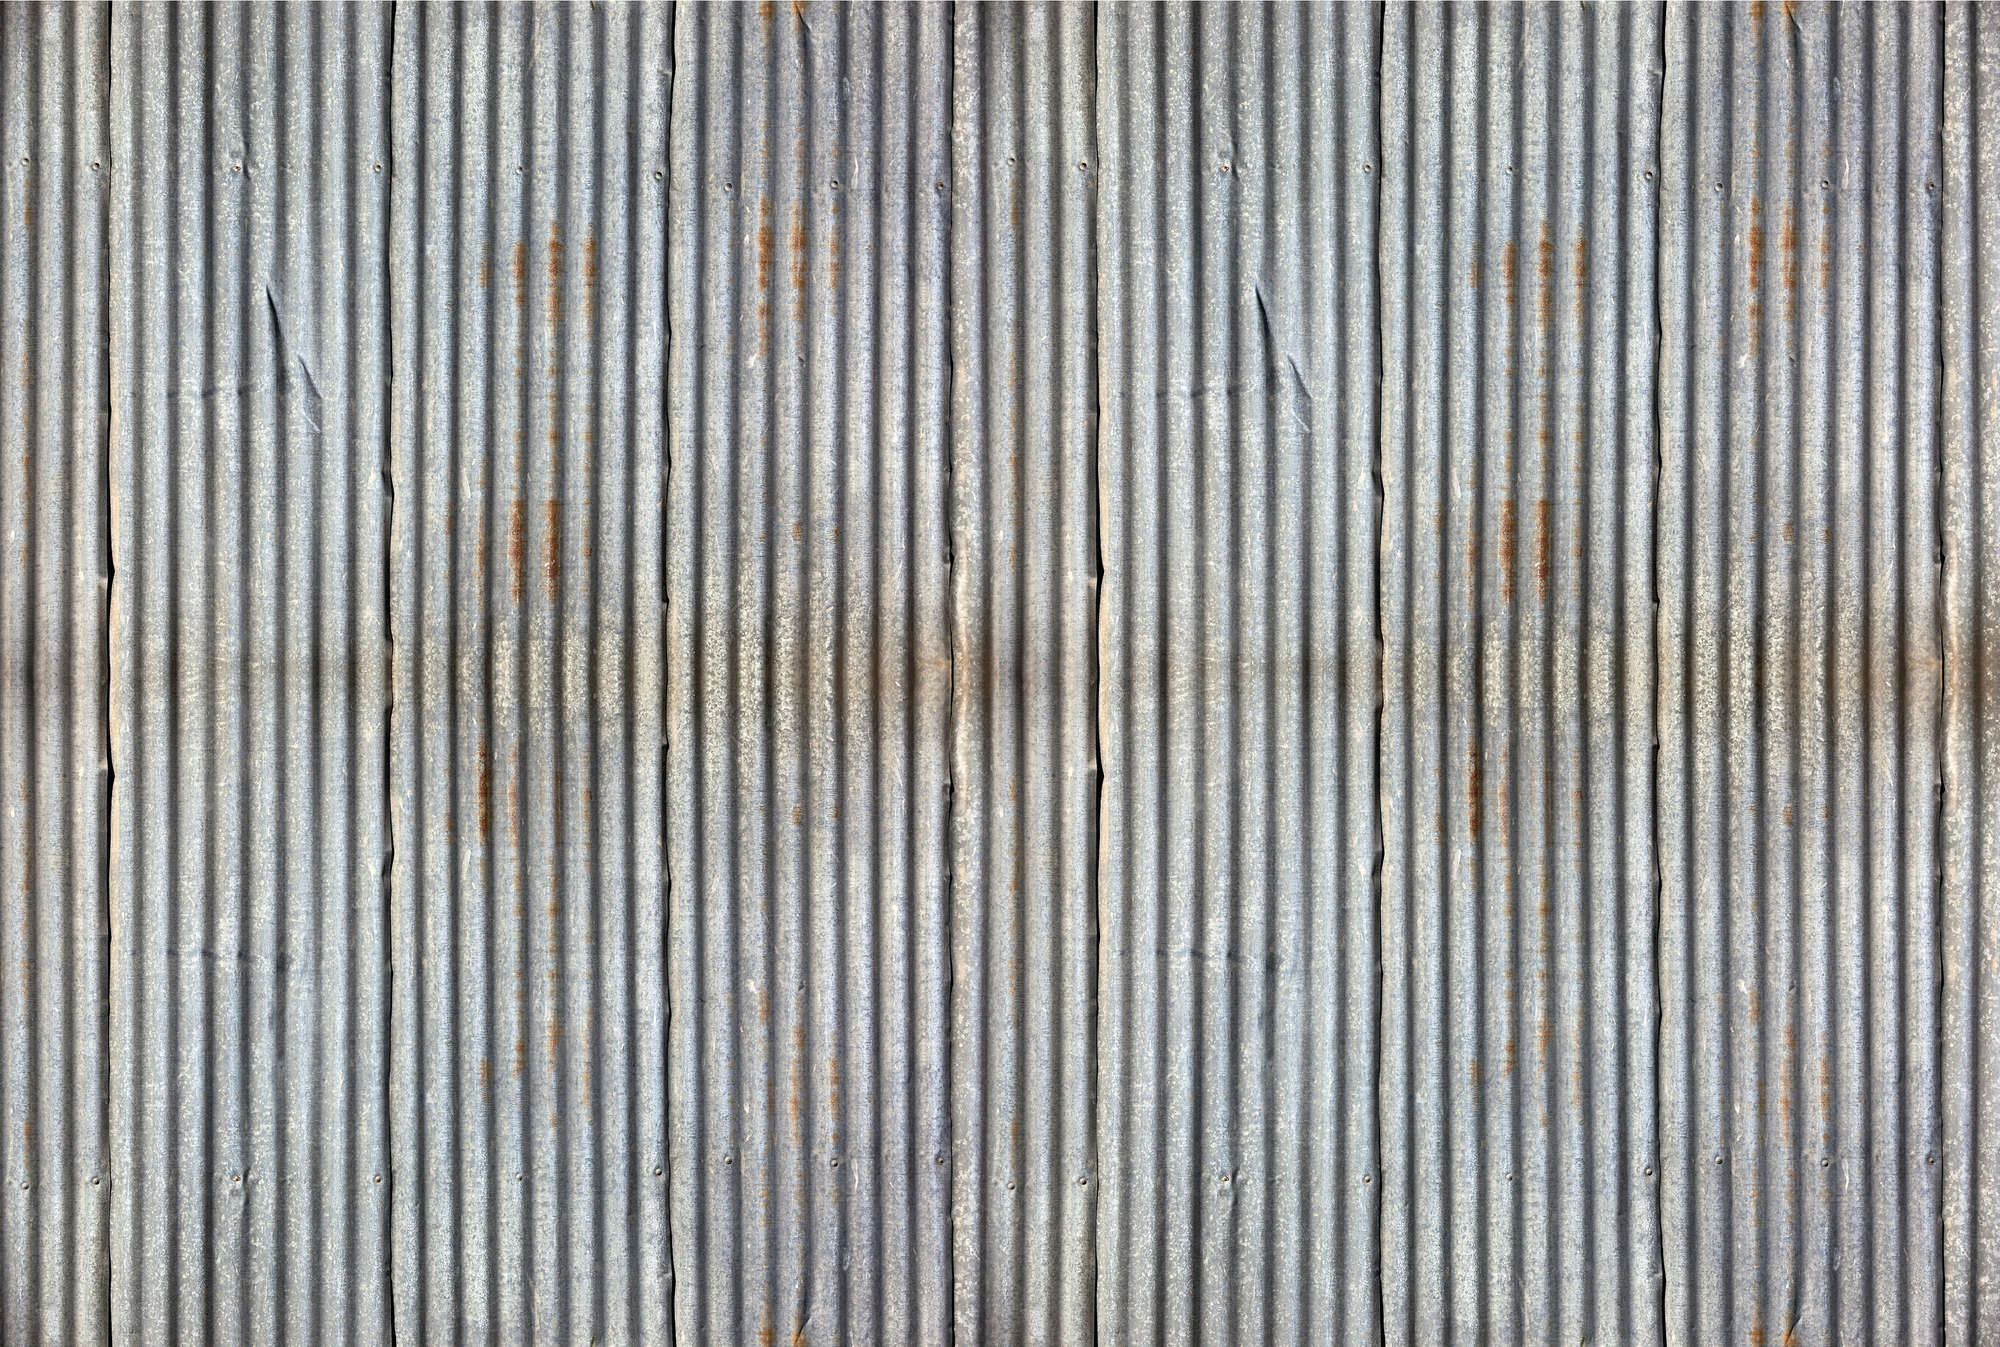             Corrugated iron - photo wallpaper 3D in rustic industrial style
        